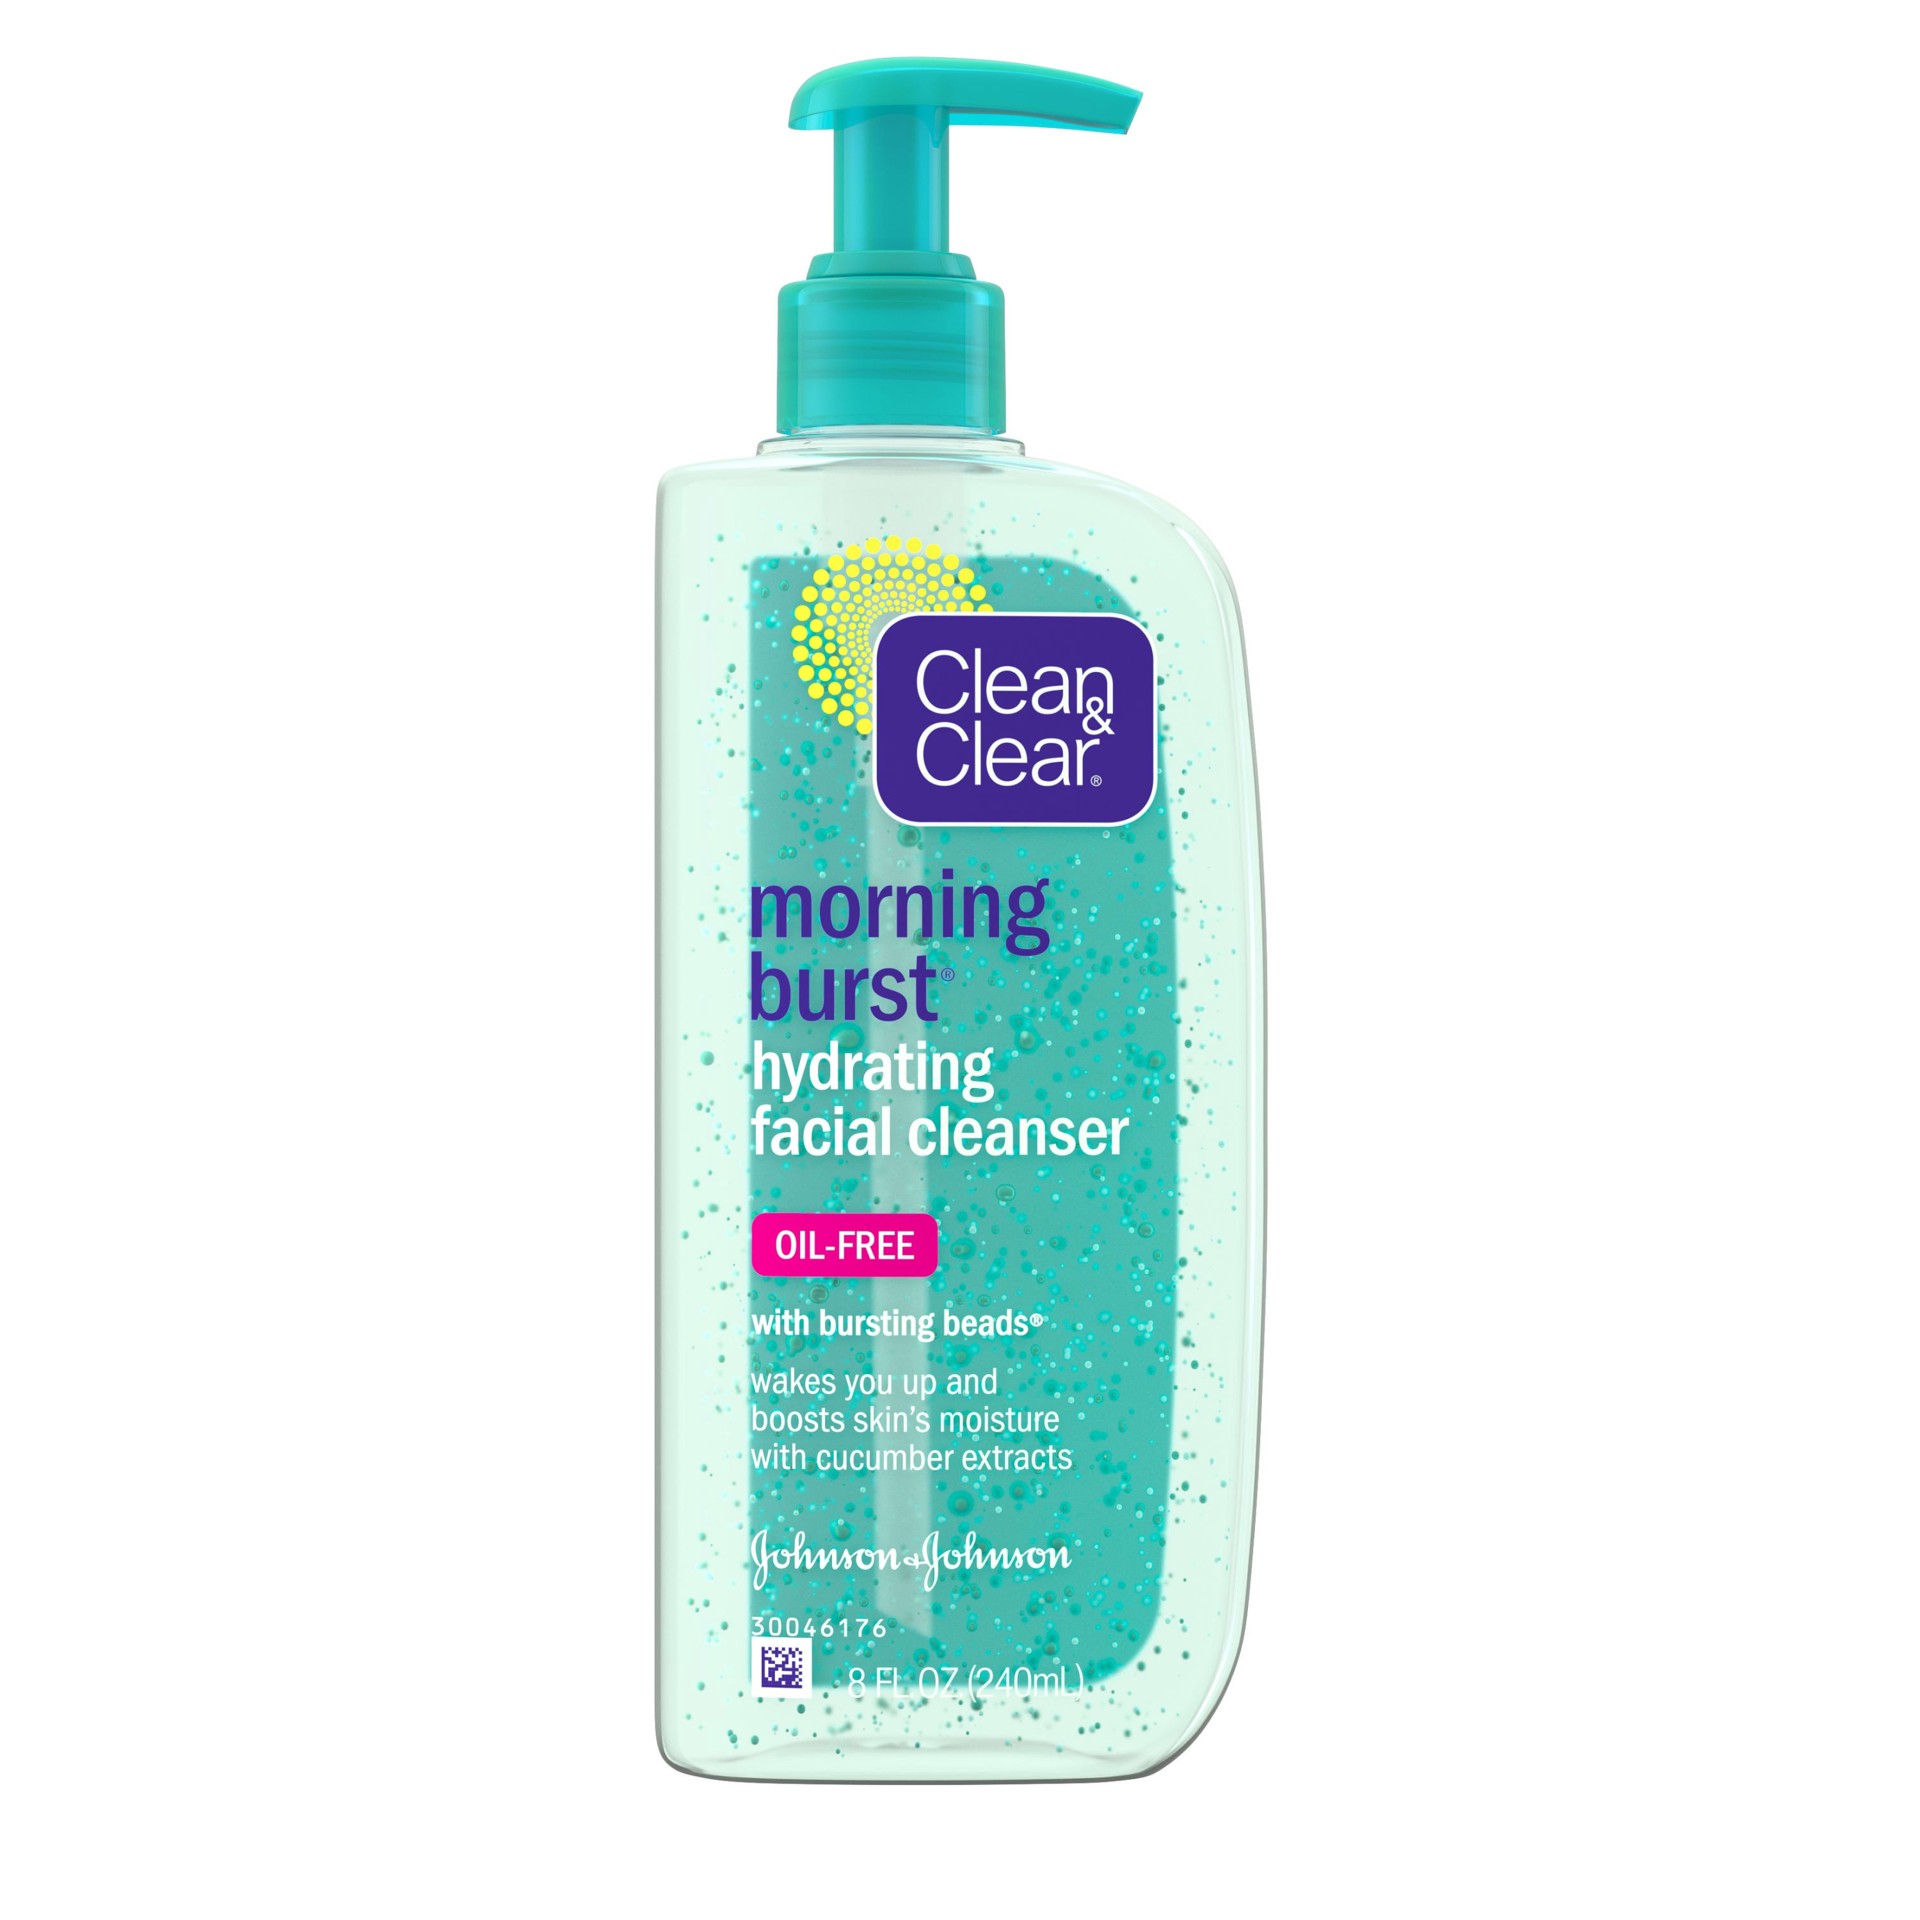 slide 1 of 8, Clean & Clear Morning Burst Oil-Free Hydrating Facial Cleanser, 8 fl oz